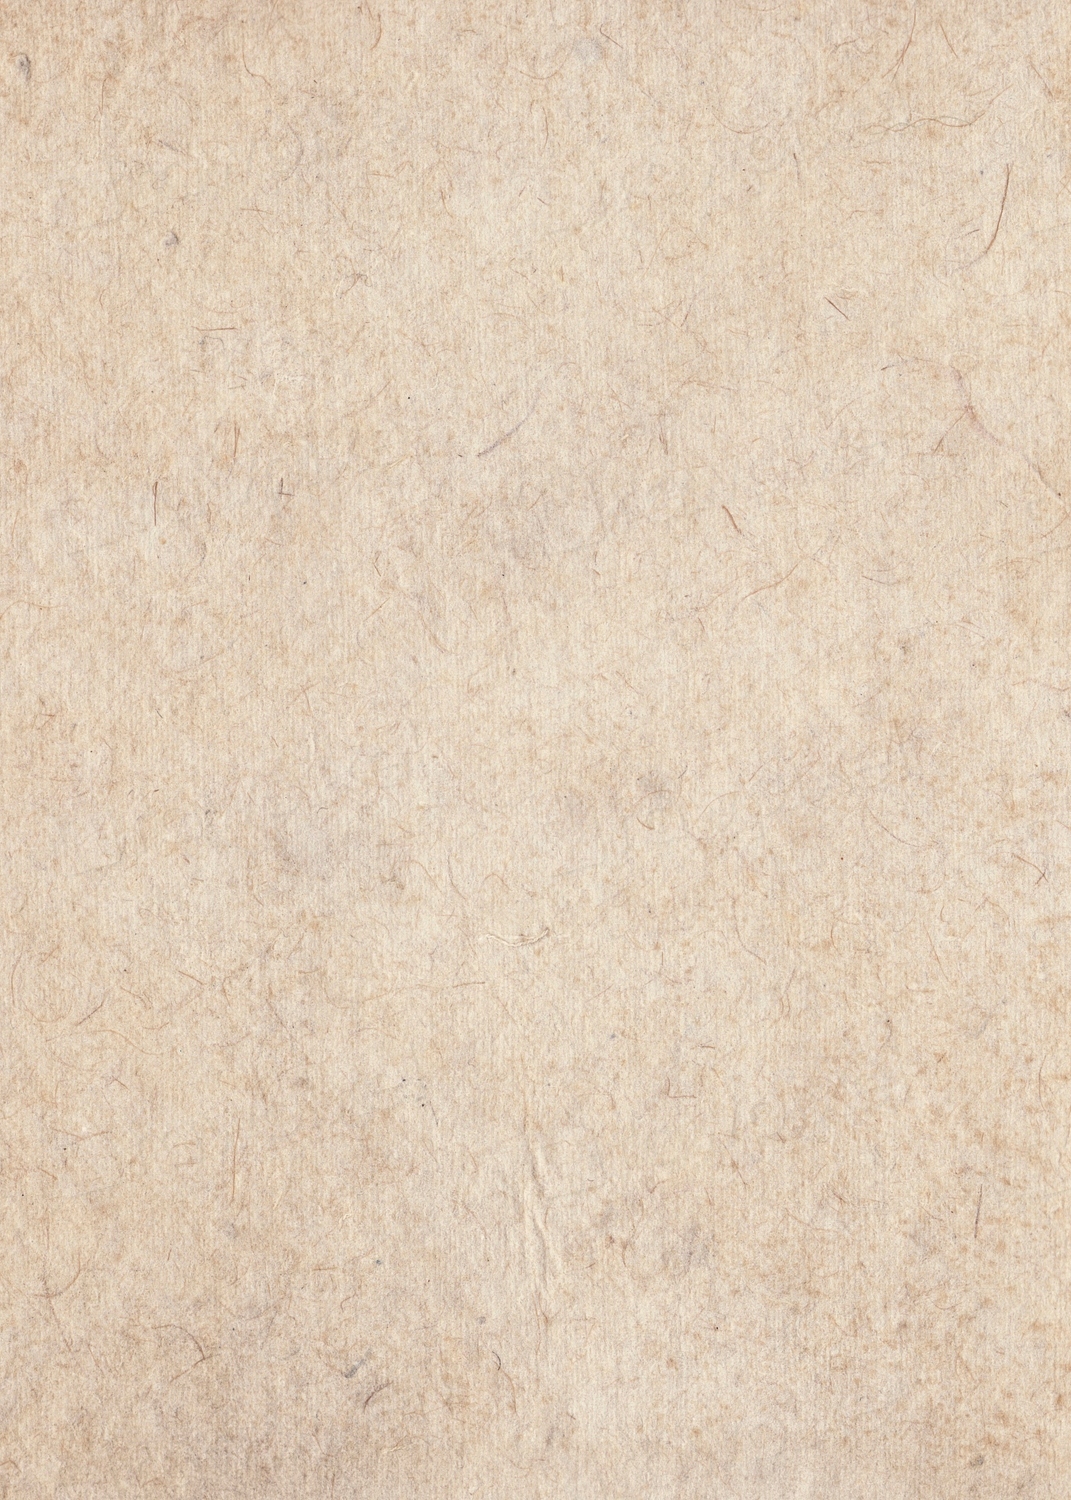 Old paper texture background, simple | Free Photo - rawpixel